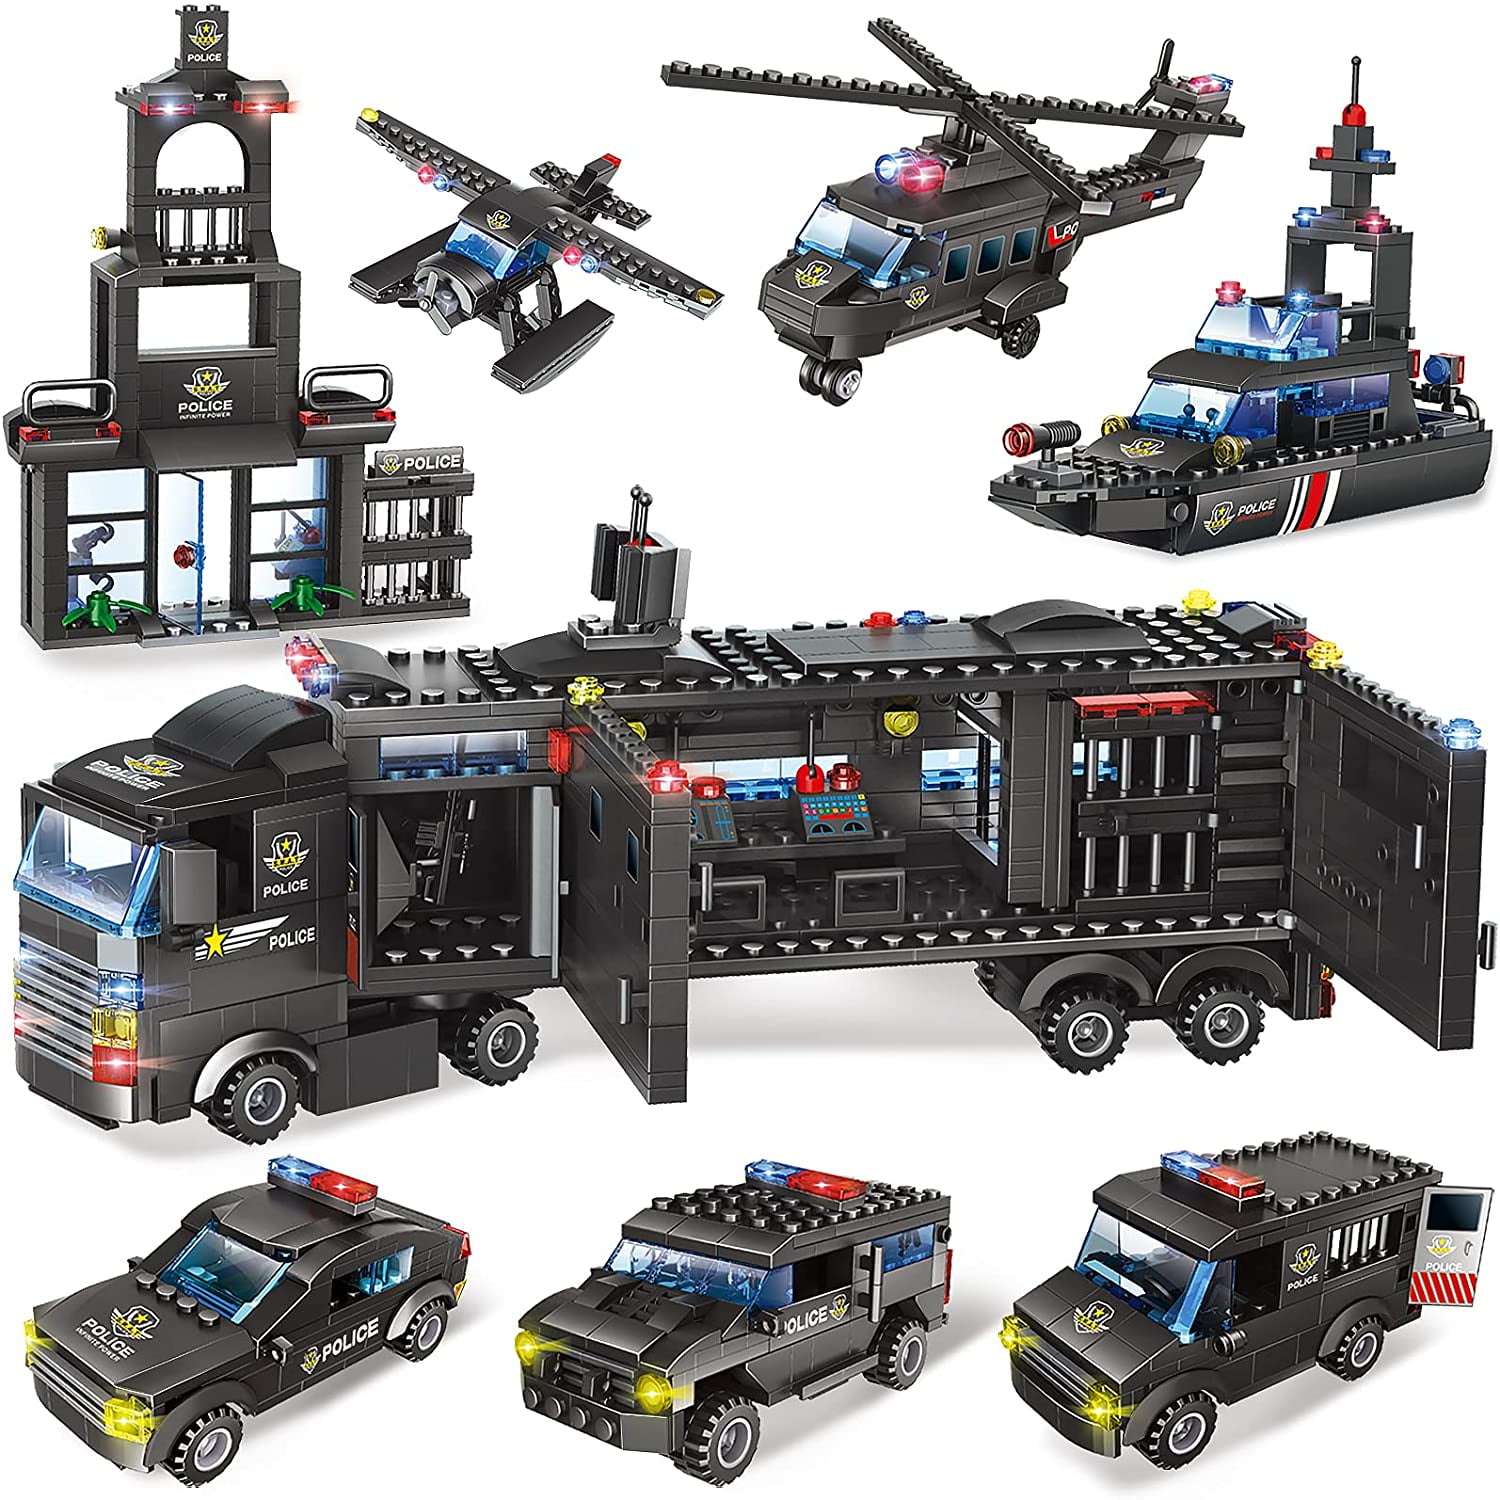 City Police SWAT Building Block Set - 8 in 1 Black Armored SWAT Vehicles  with Cop Cars, Helicopter, Motorbike, Best Roleplay STEM Toy Best Gift for